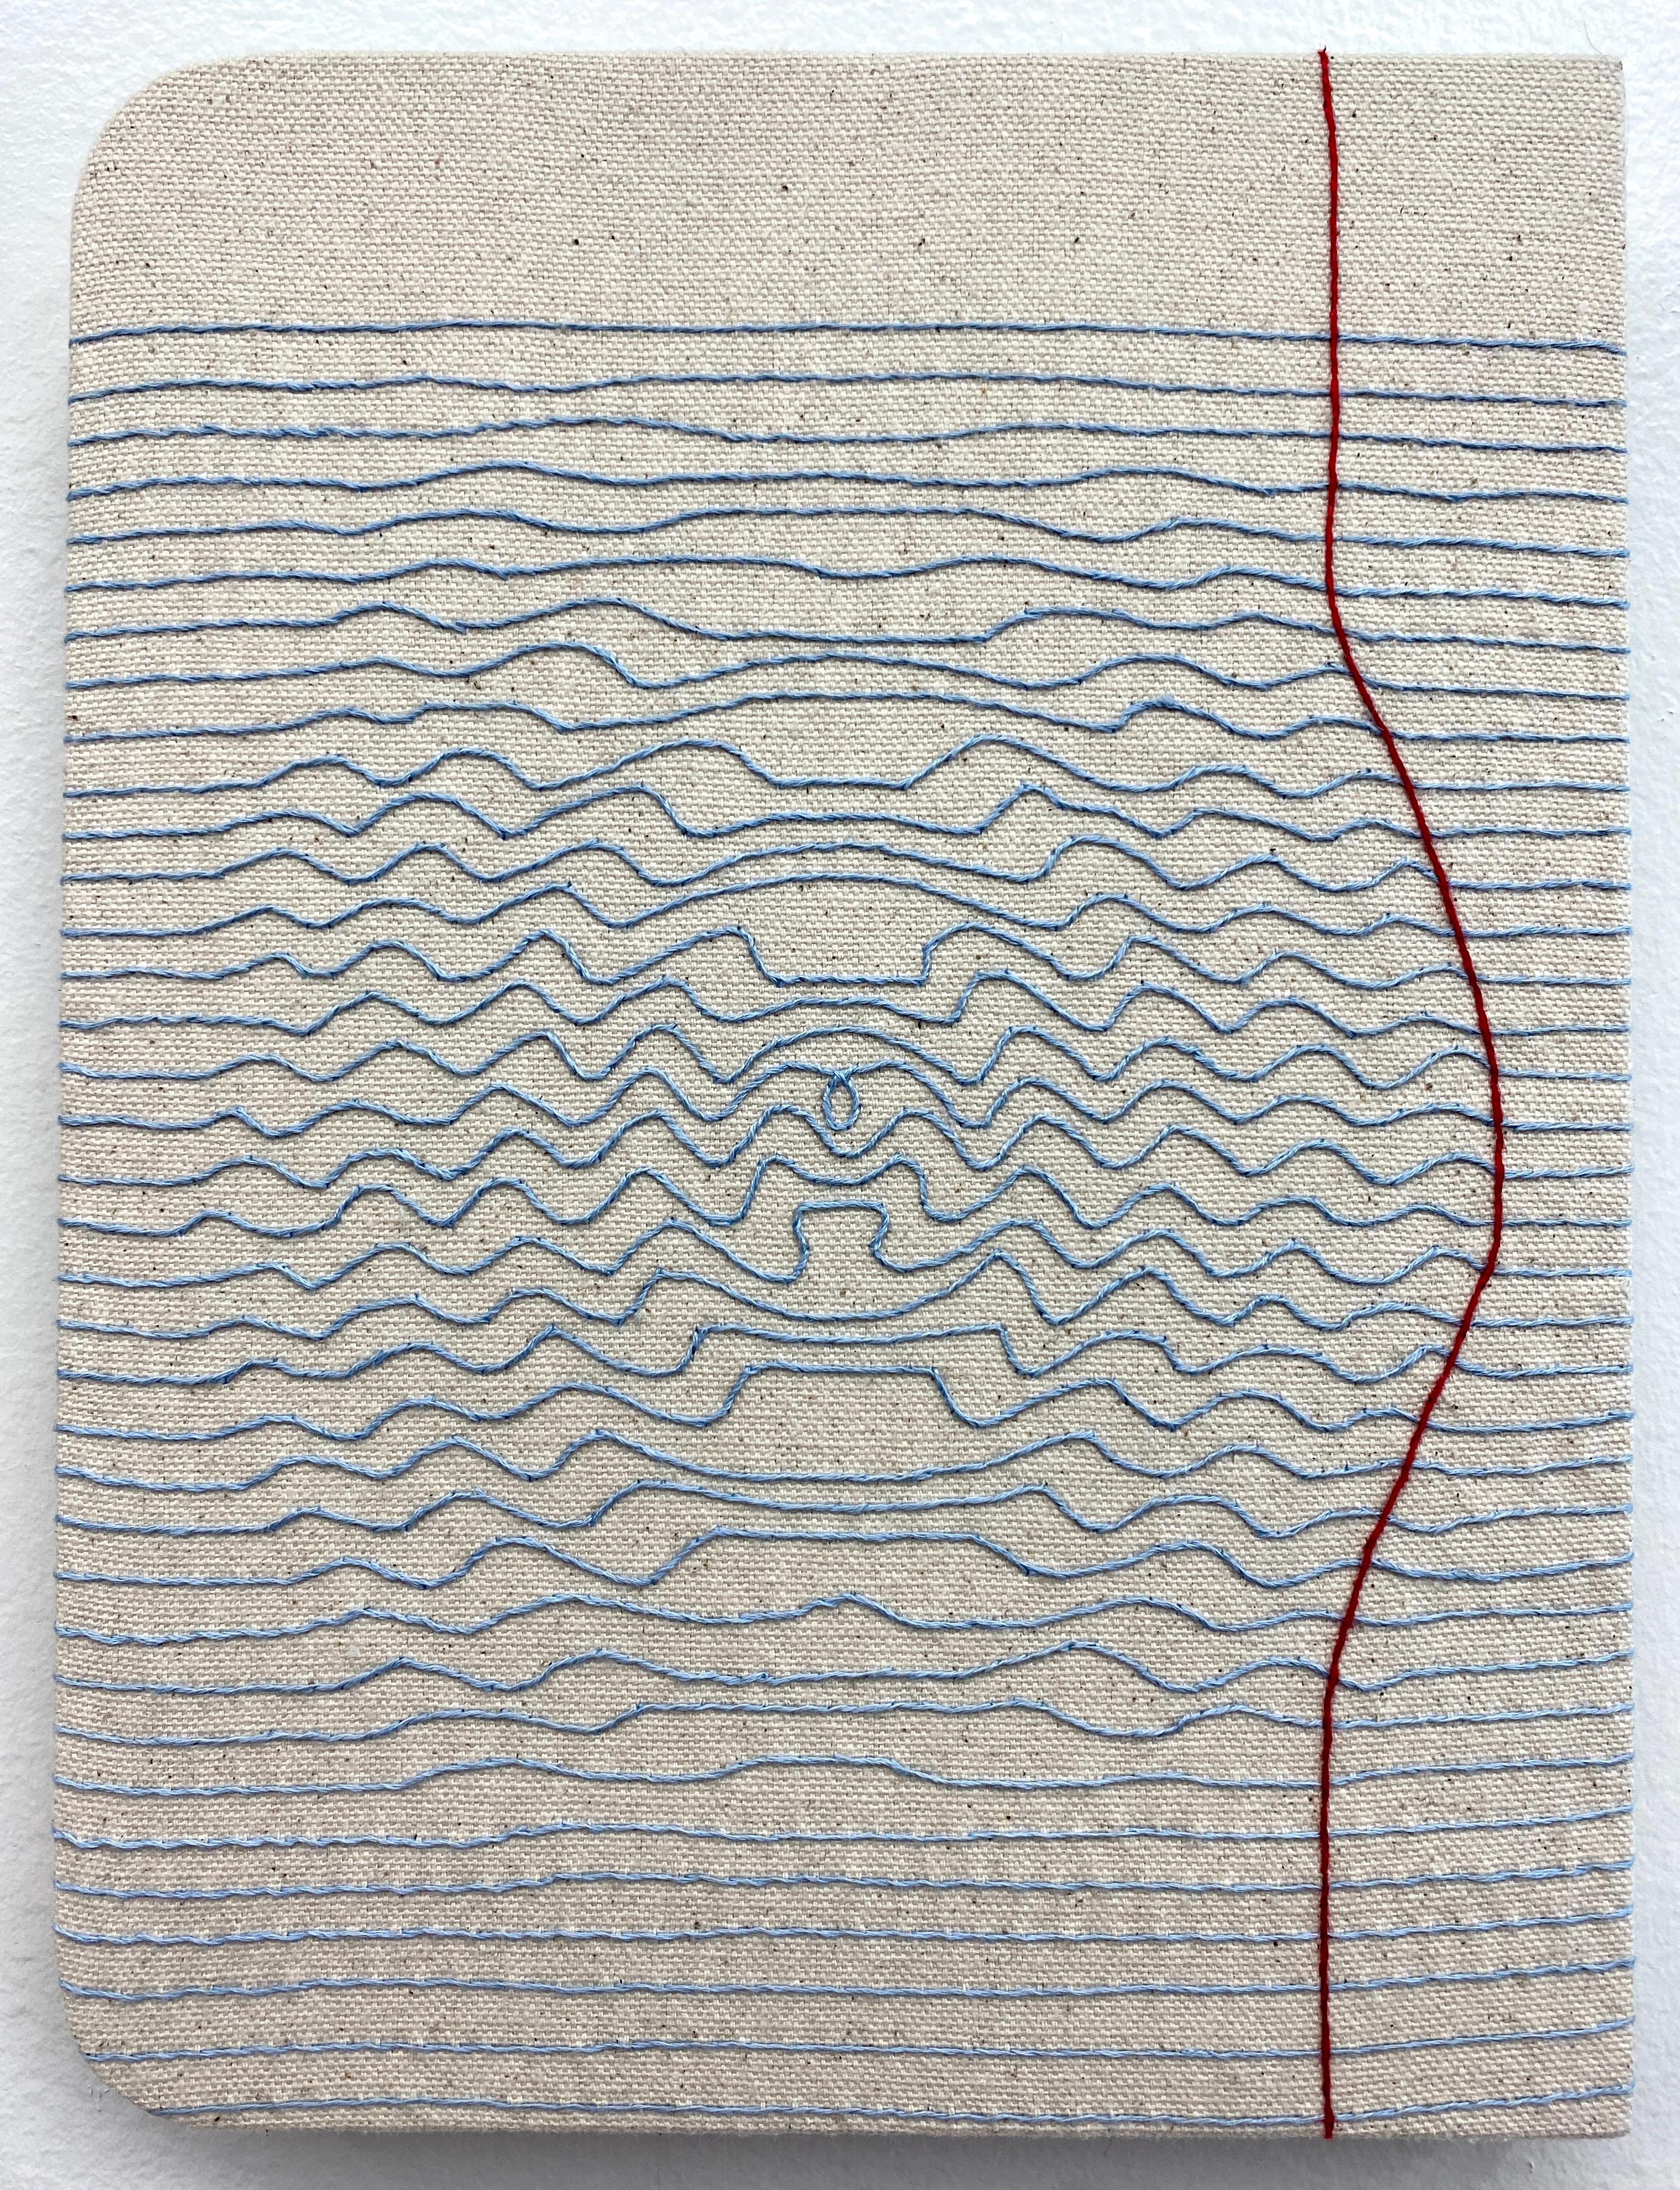 Notes for String Theory 040922, Contemporary Embroidery on Canvas, Hand Stitched